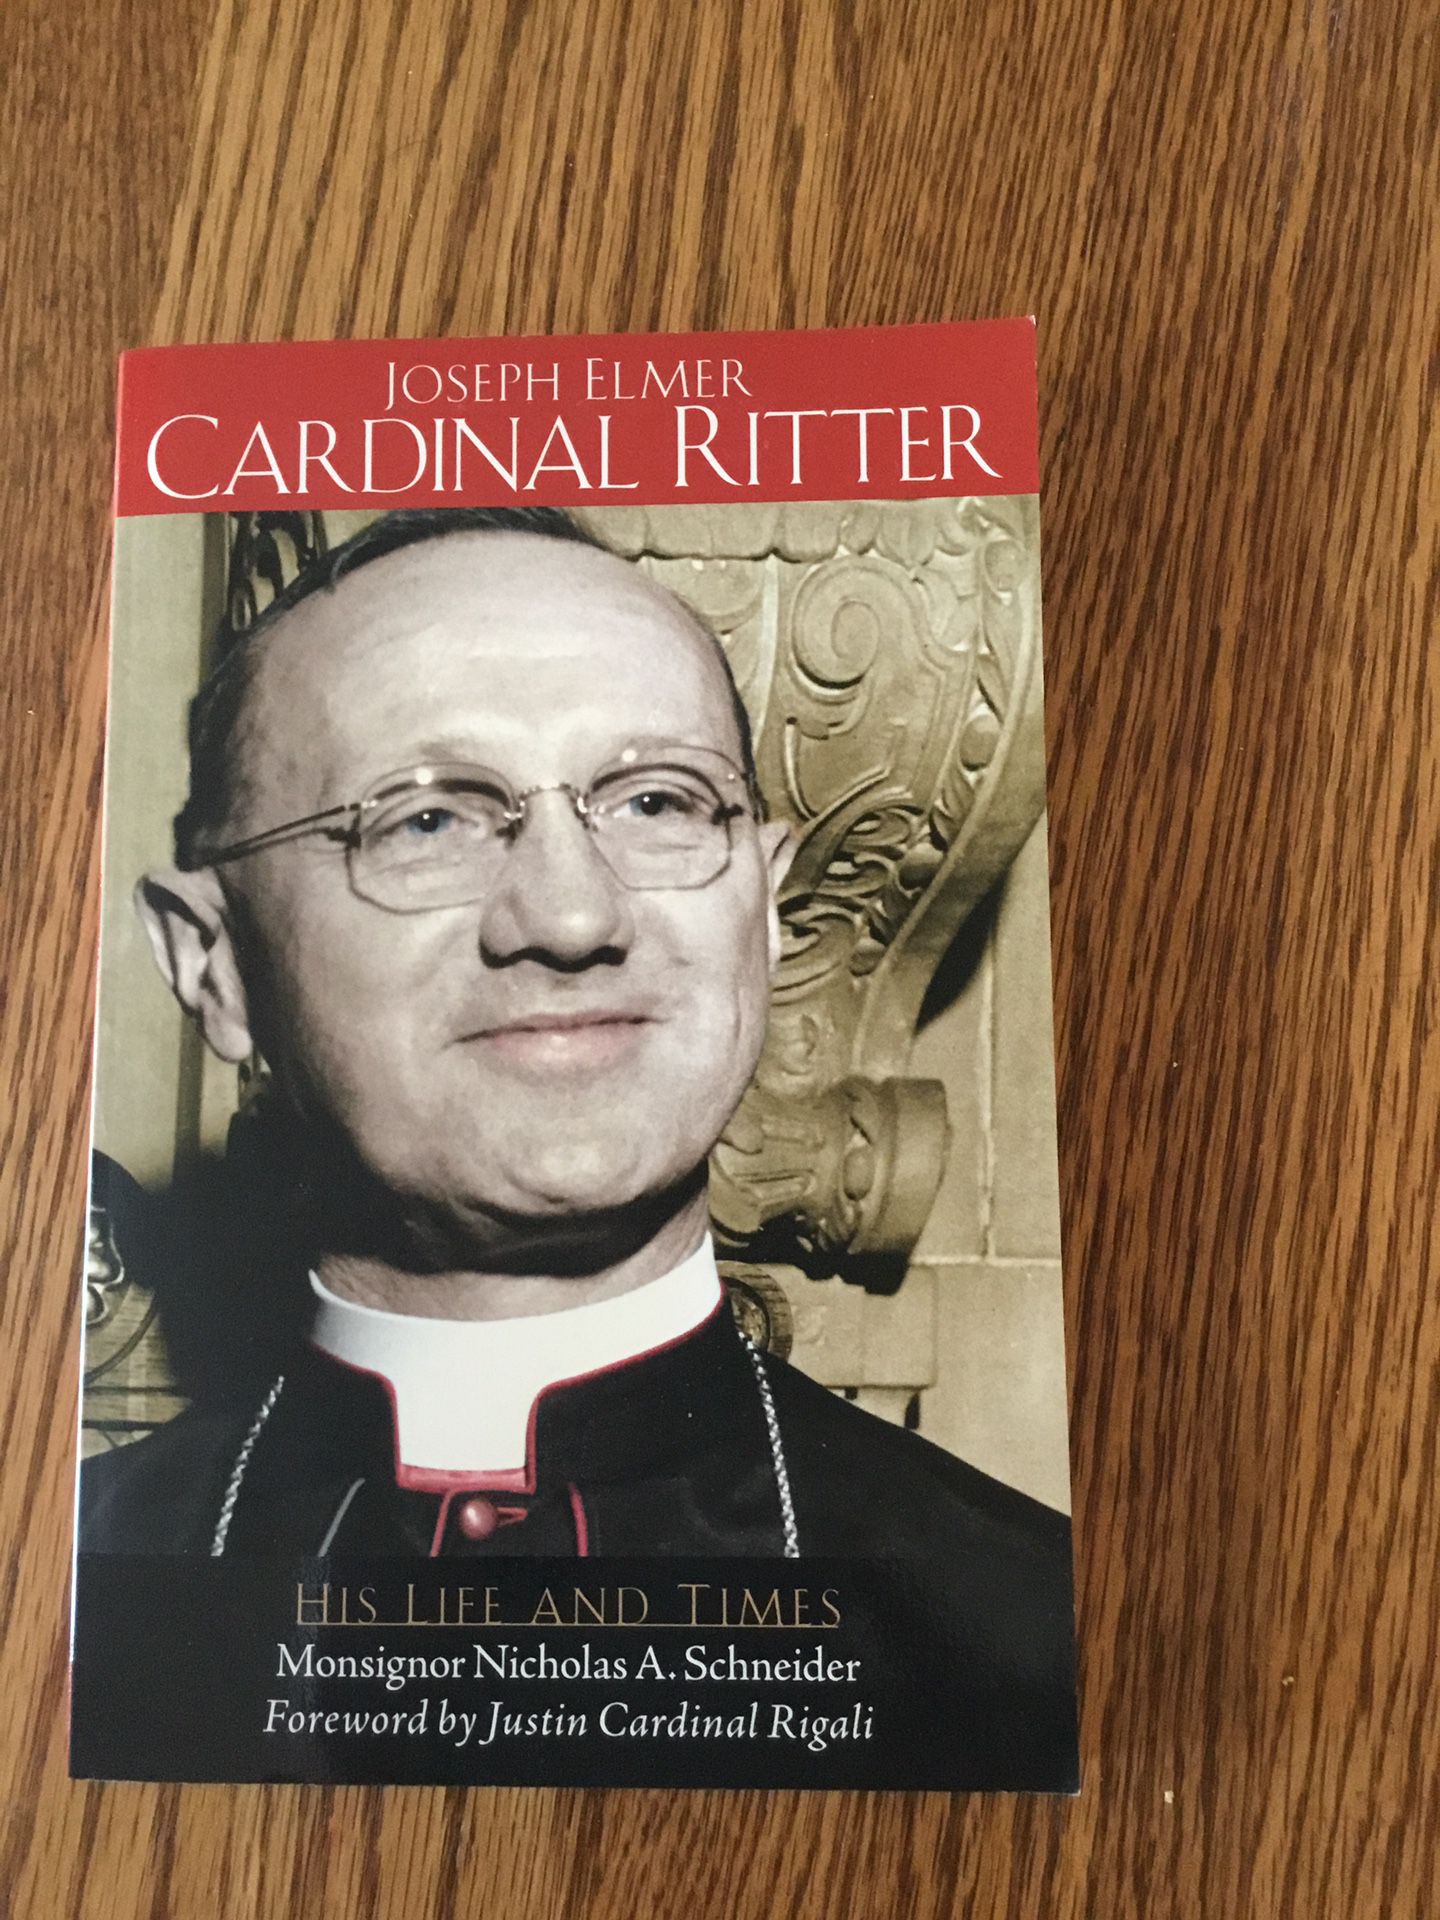 Cardinal Ritter his life and times